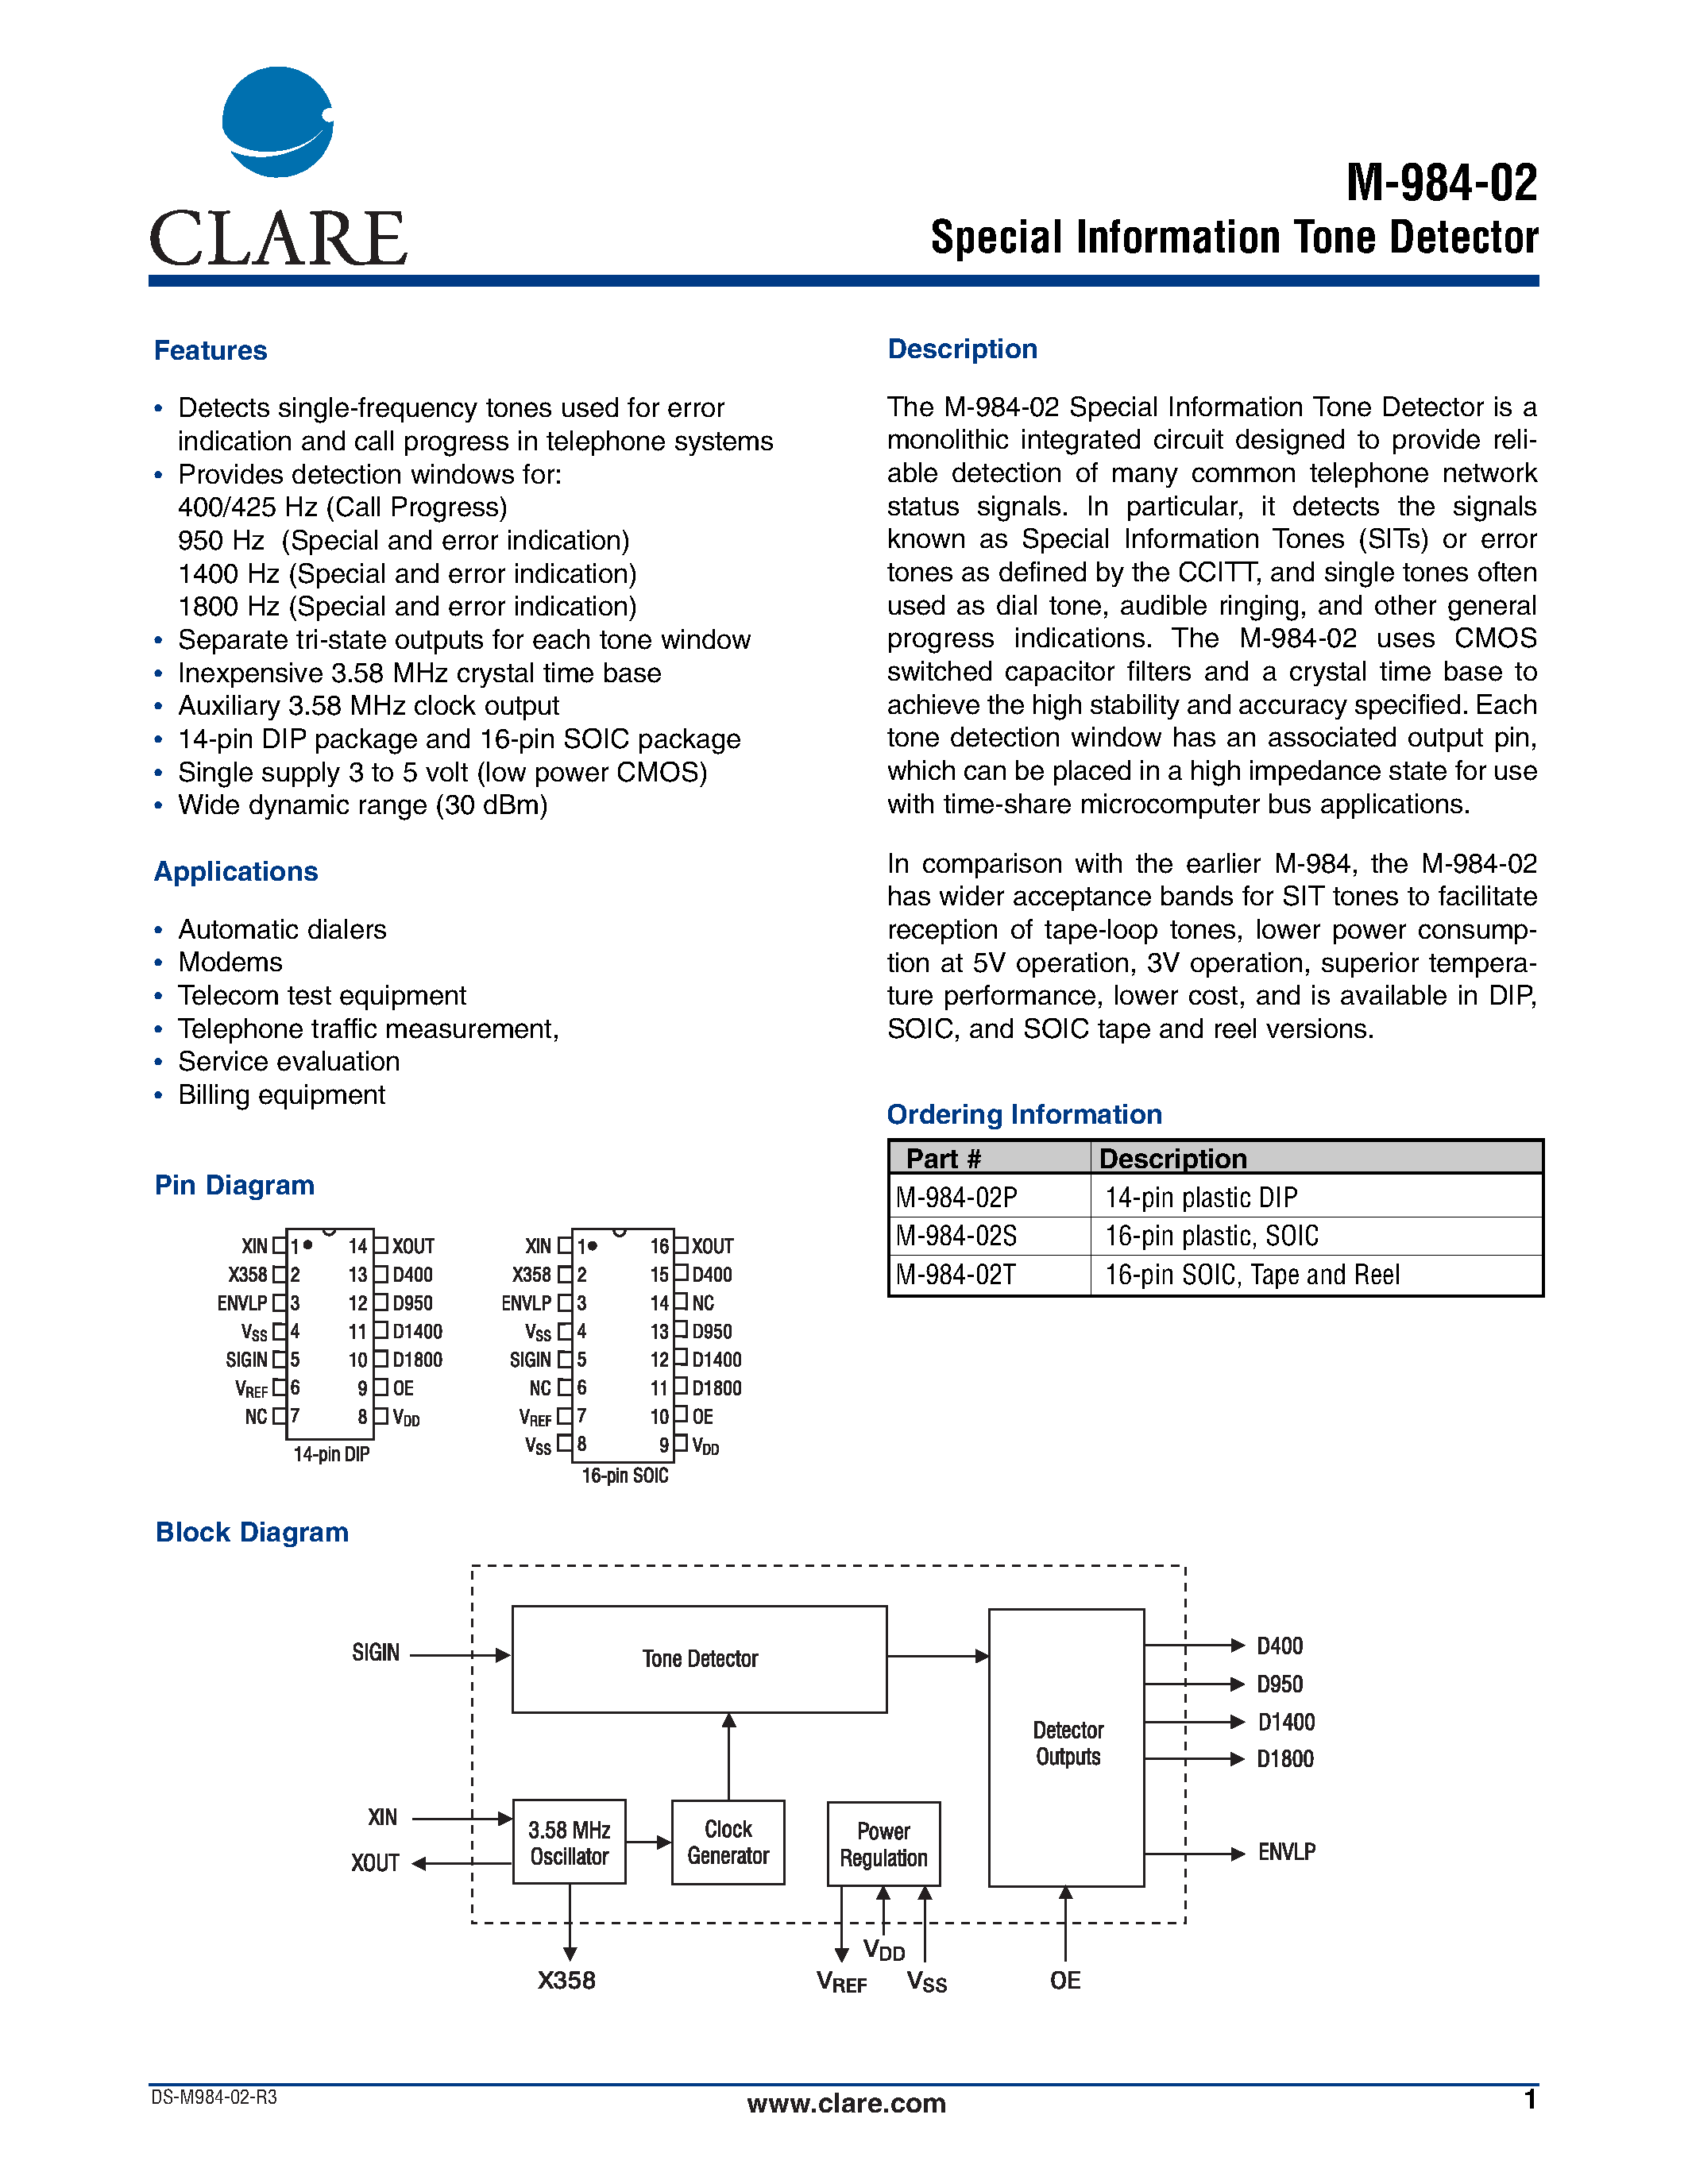 Datasheet M-984-02P - Special Information Tone Detector page 1